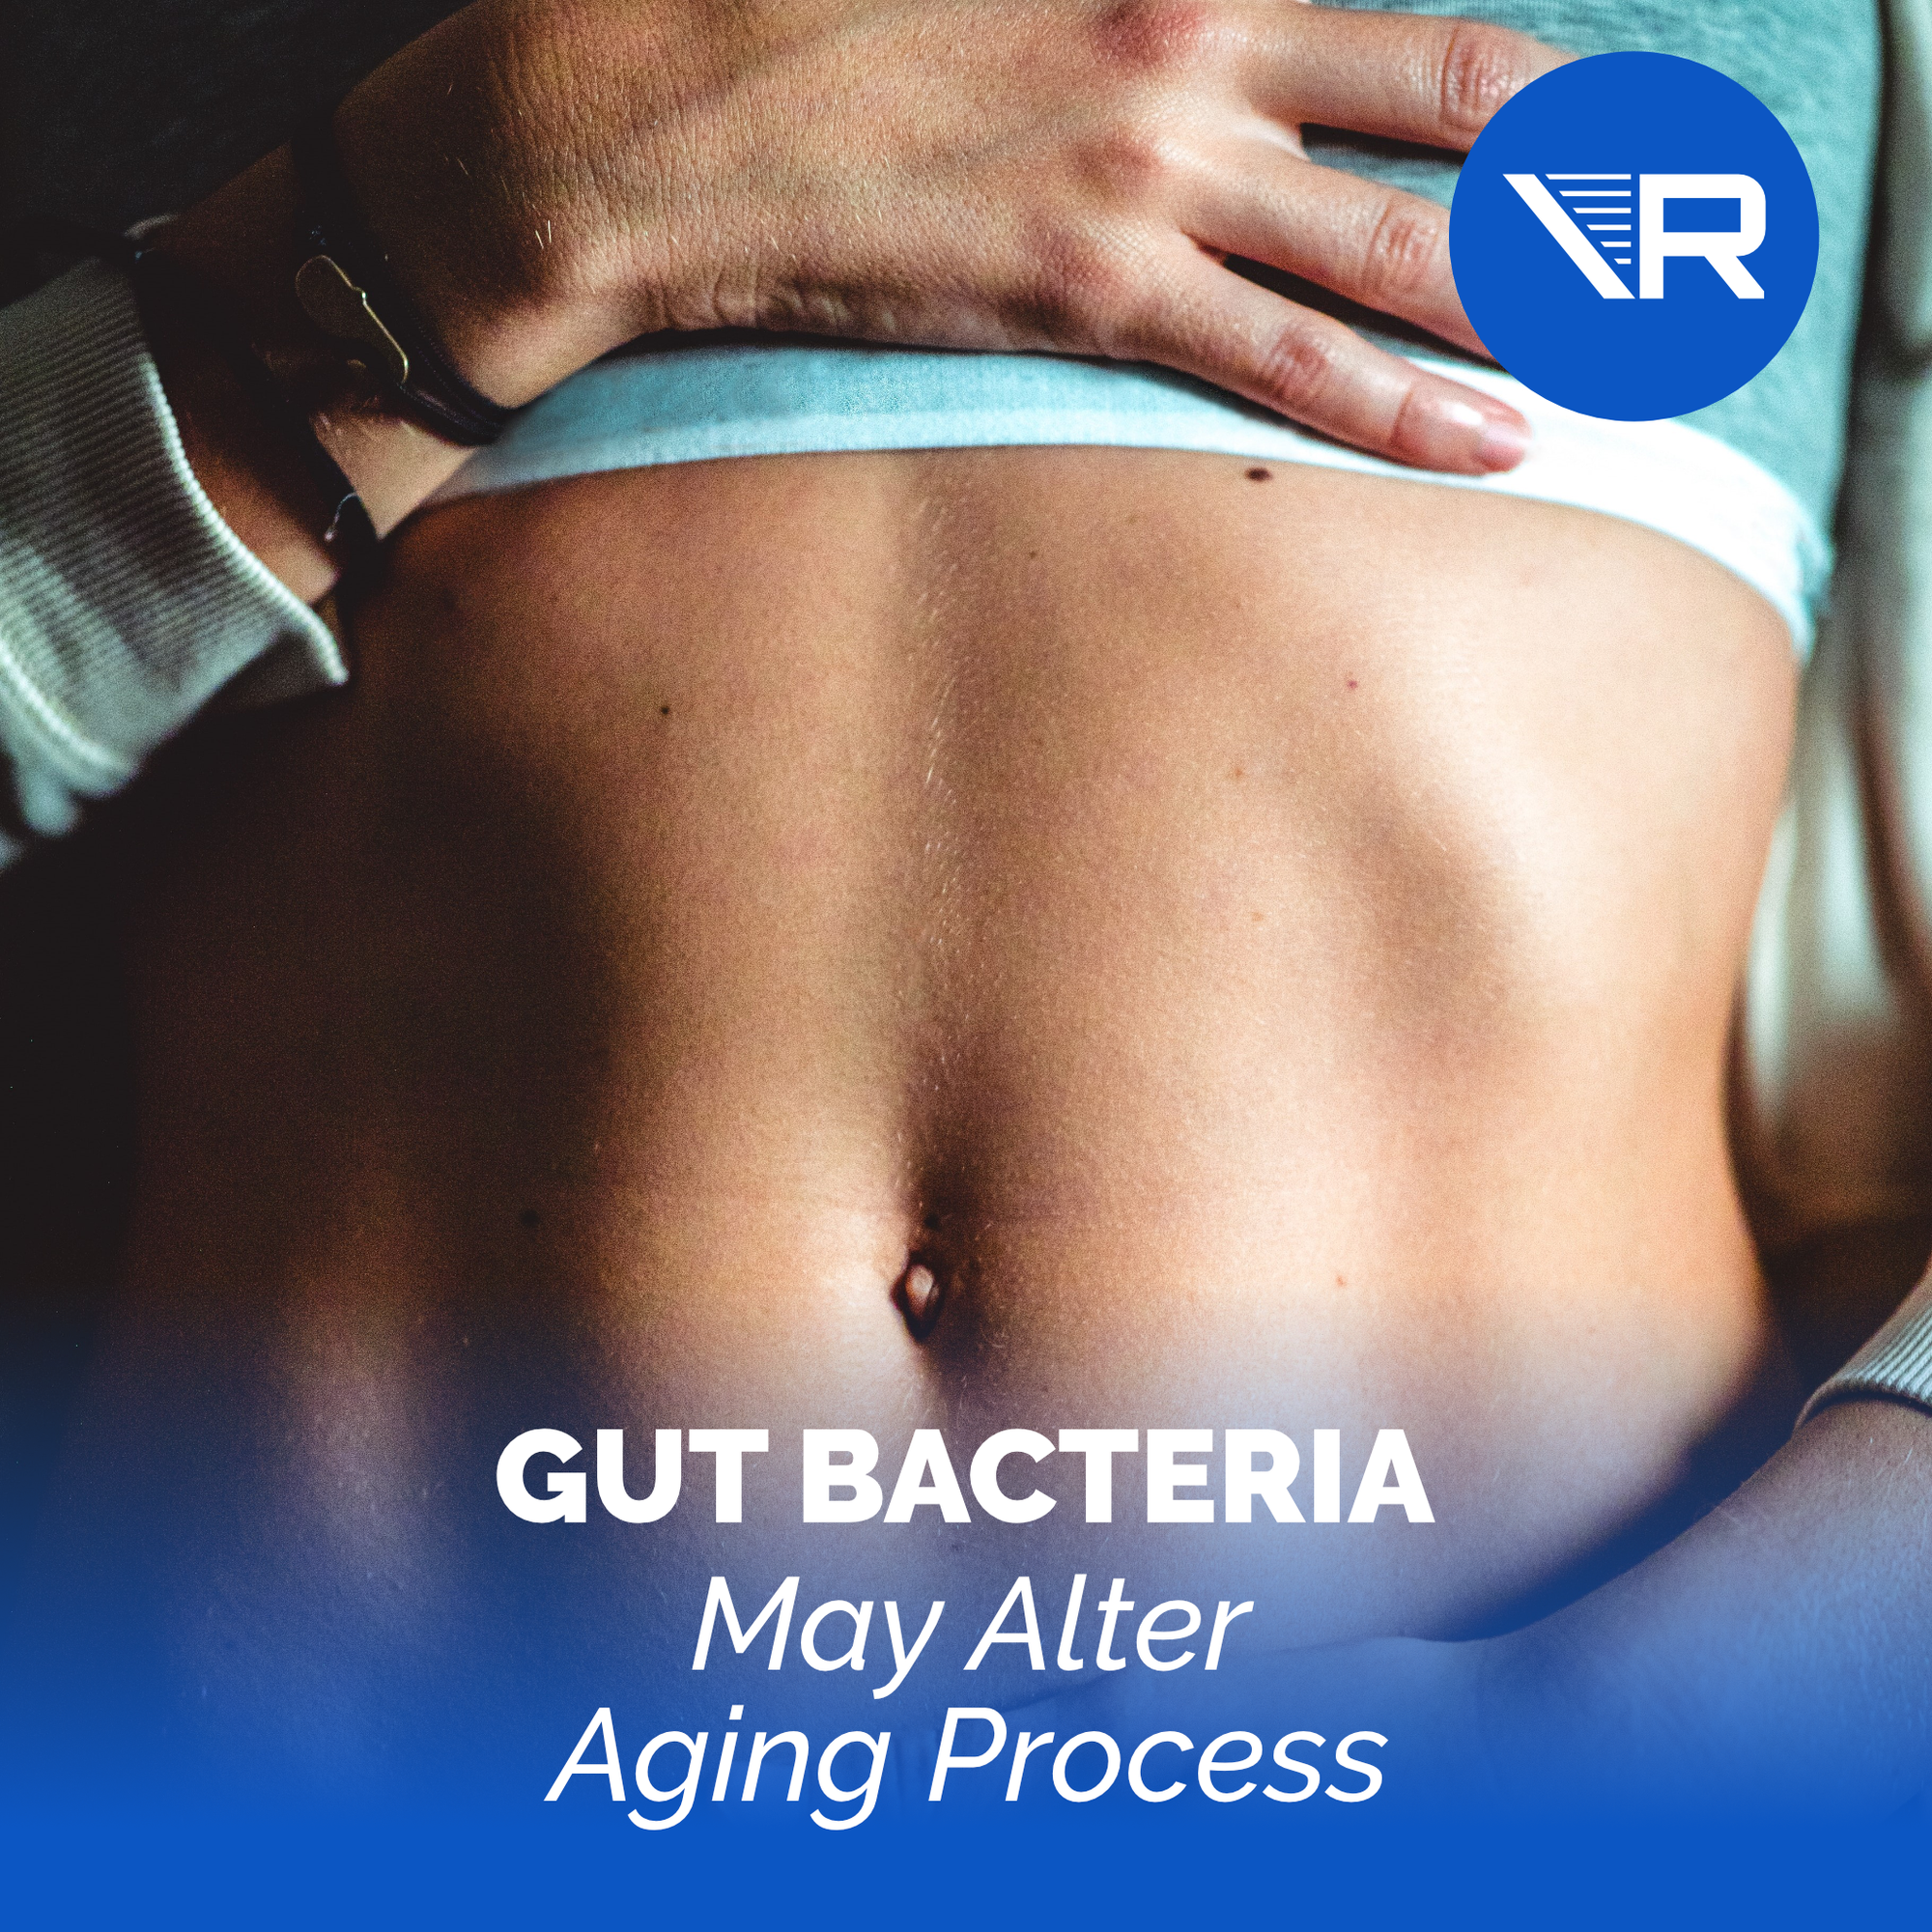 Bacteria in the Gut May Alter Aging Process